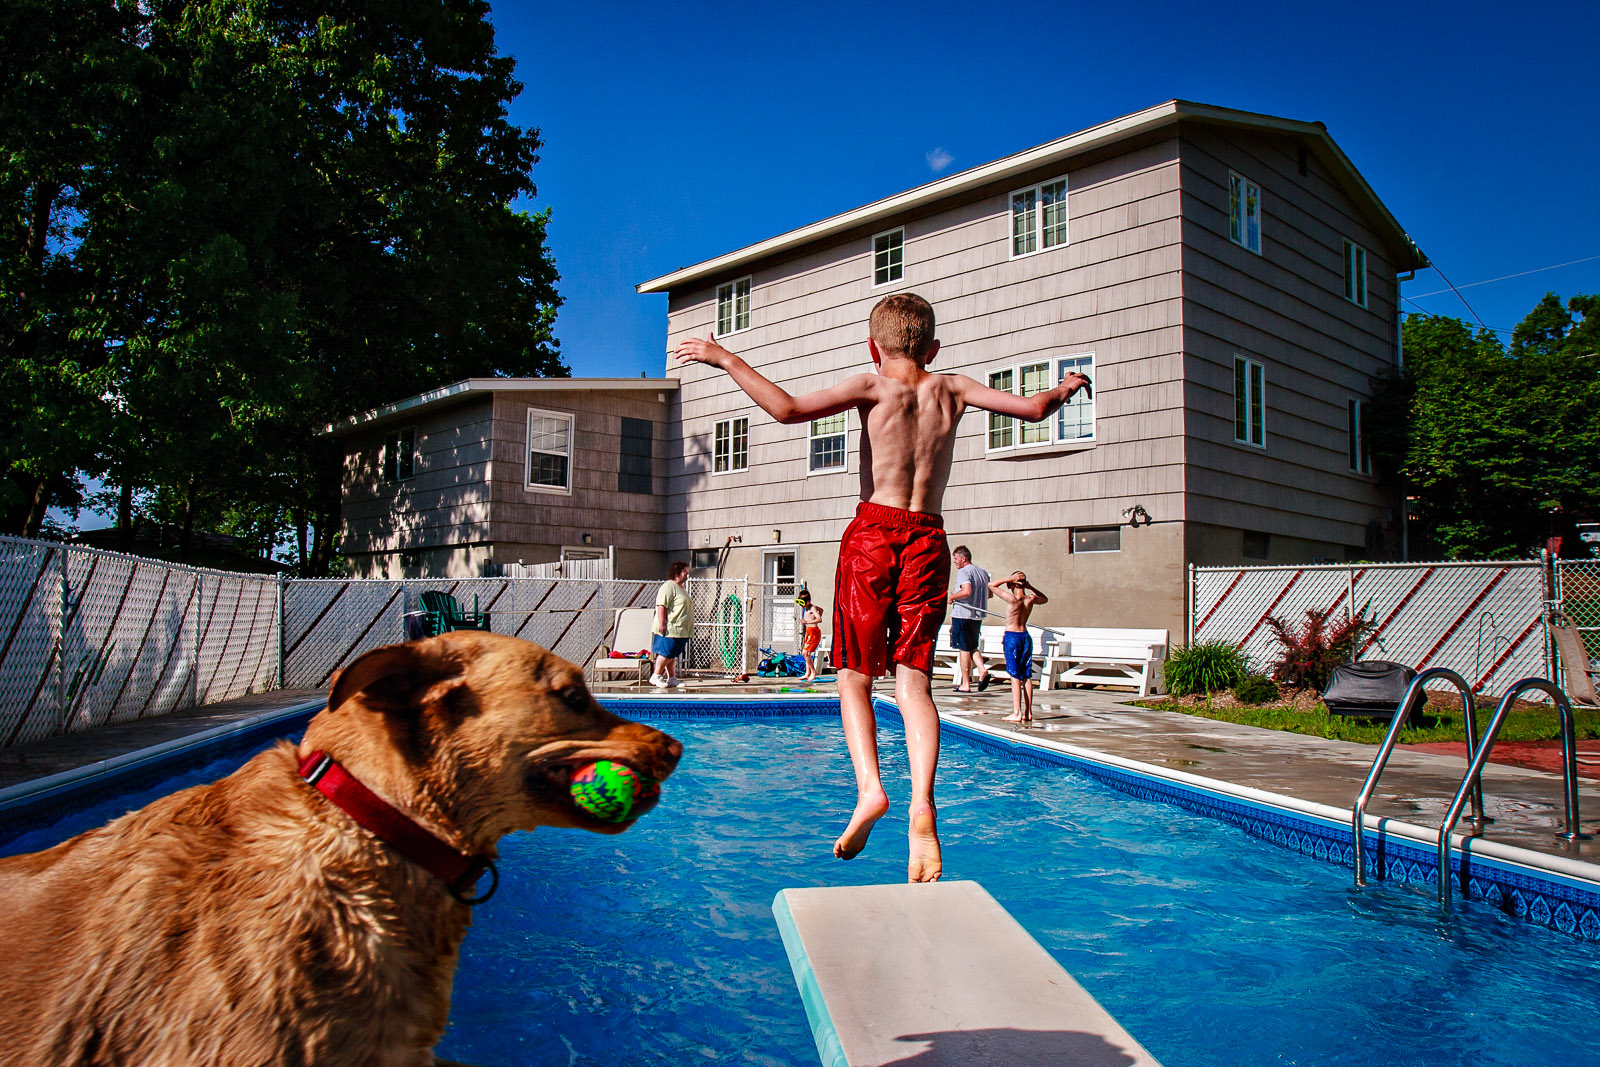 Chris Dietrich bounces from the diving board while his Golden Retriever, Cali, races to meet him in the pool on an July afternoon in Syracuse, New York.Photograph by Jesse Neider